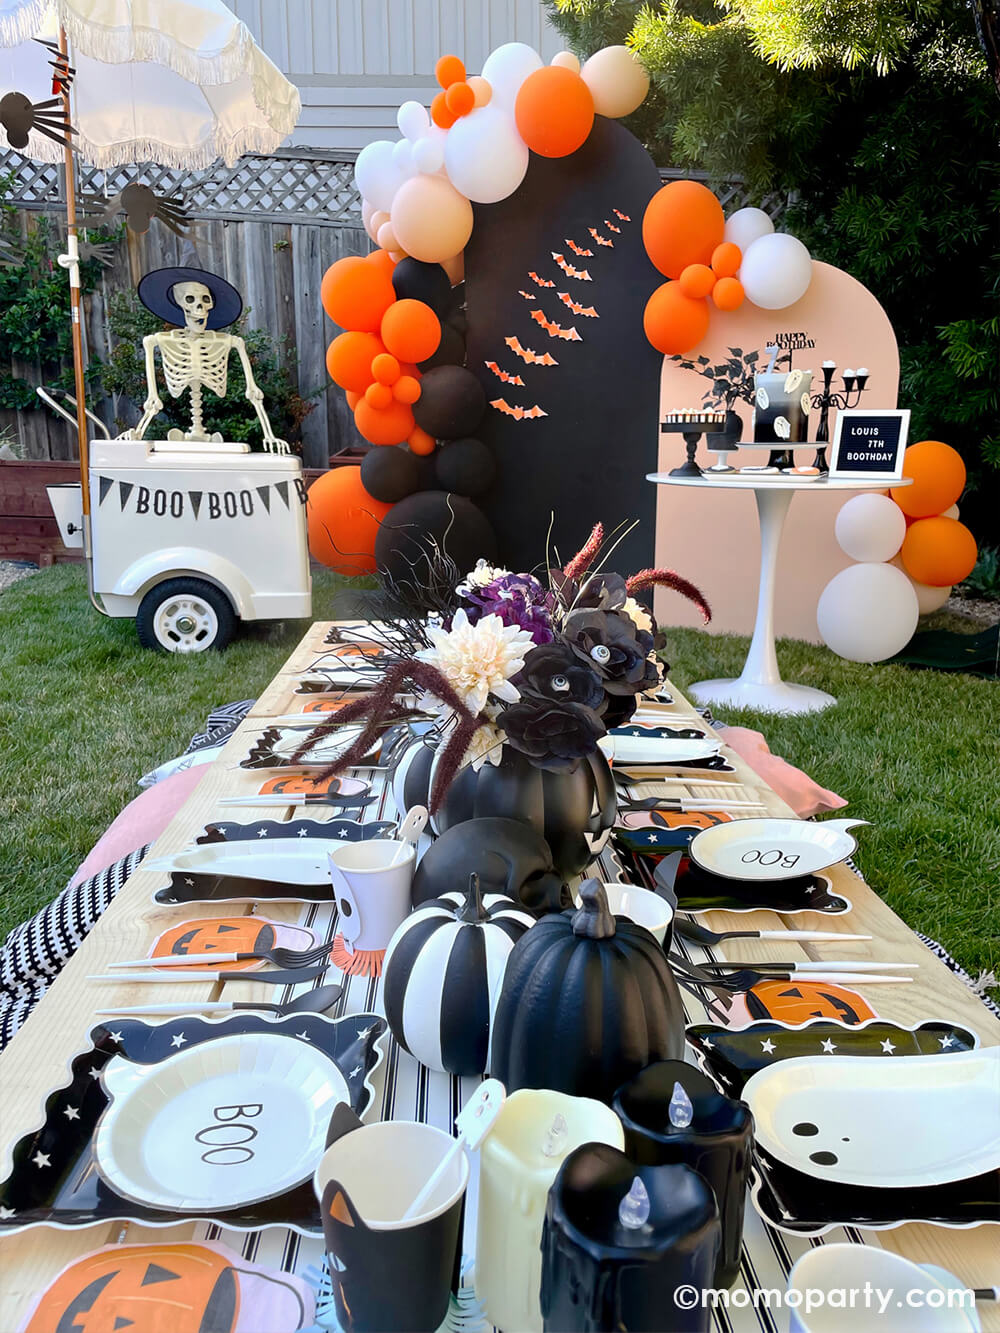 A spooky fun kid-friendly Halloween party set up featuring classic orange and black color themed party supplies including My Mind's Eye bat shaped paper decorations in orange on the backdrop which was behind an adorable kid low picnic table filled with fun Halloween themed party tableware including ghost shaped plates, jack o' lantern pumpkin bucket shaped napkins with black and white pumpkins, candles, skulls and Halloween themed floral arrangement as the centerpiece.